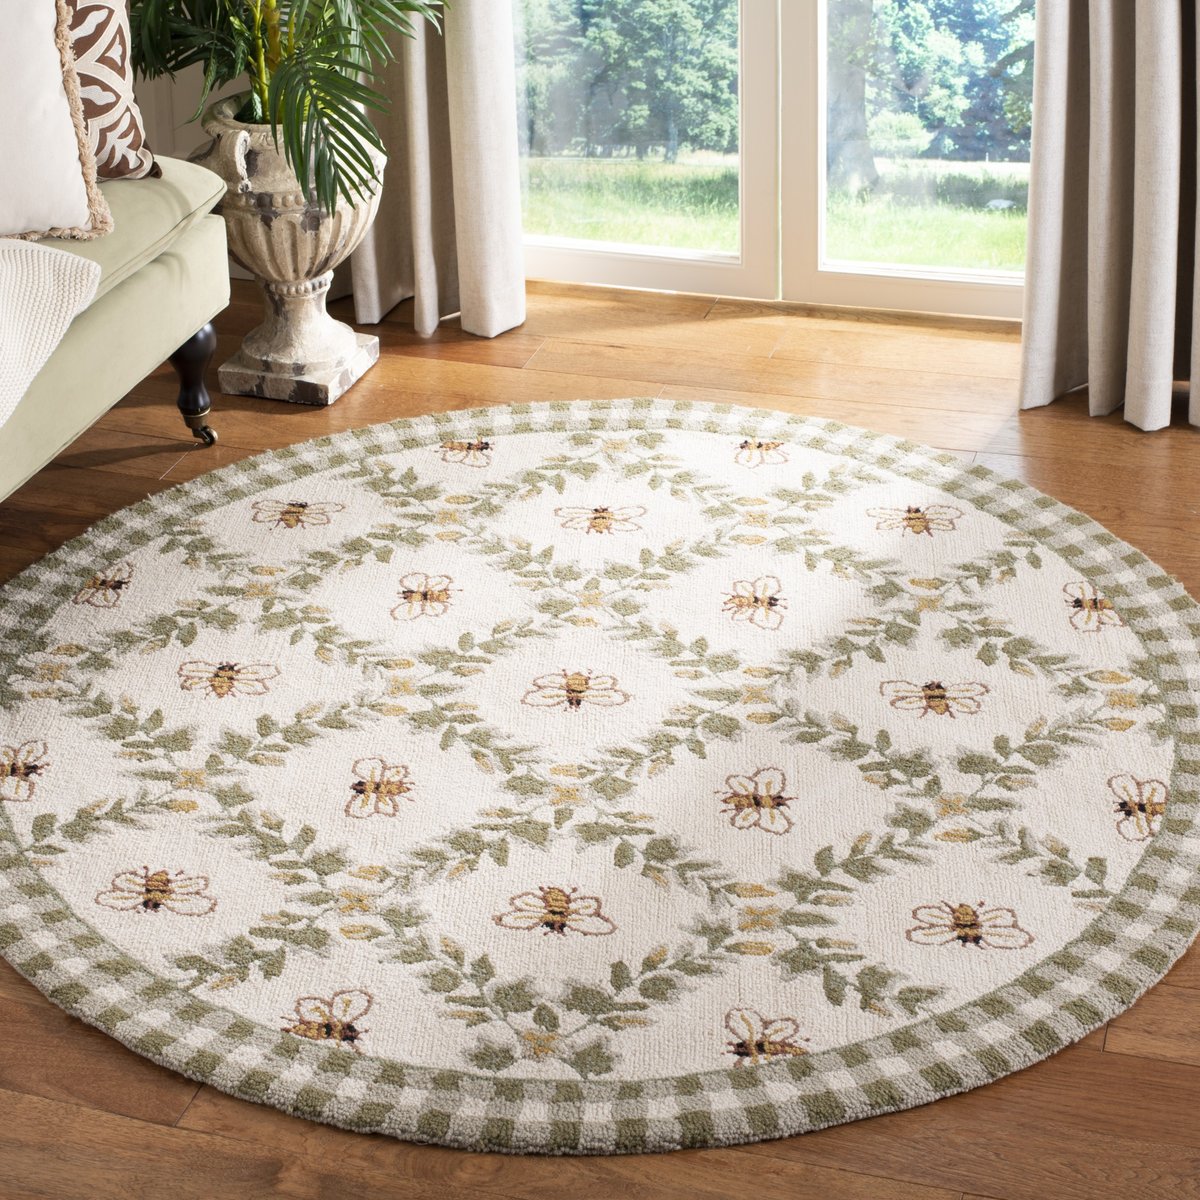 Safavieh Chelsea HK55A 5'6 x 5'6 Round Ivory / Green Area Rug